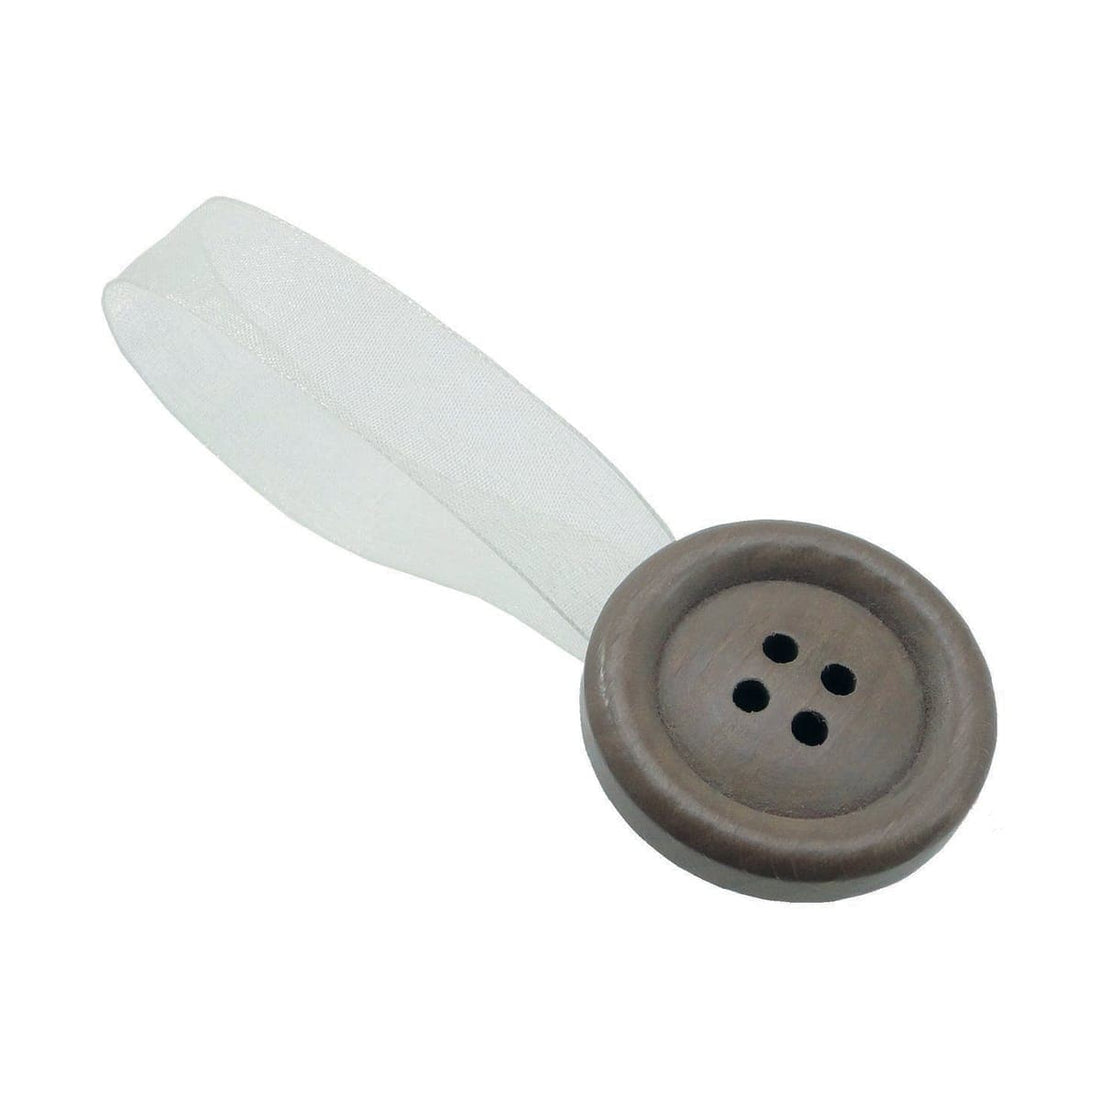 DOVE GREY BUTTON MAGNETS D38MM - best price from Maltashopper.com BR480008805